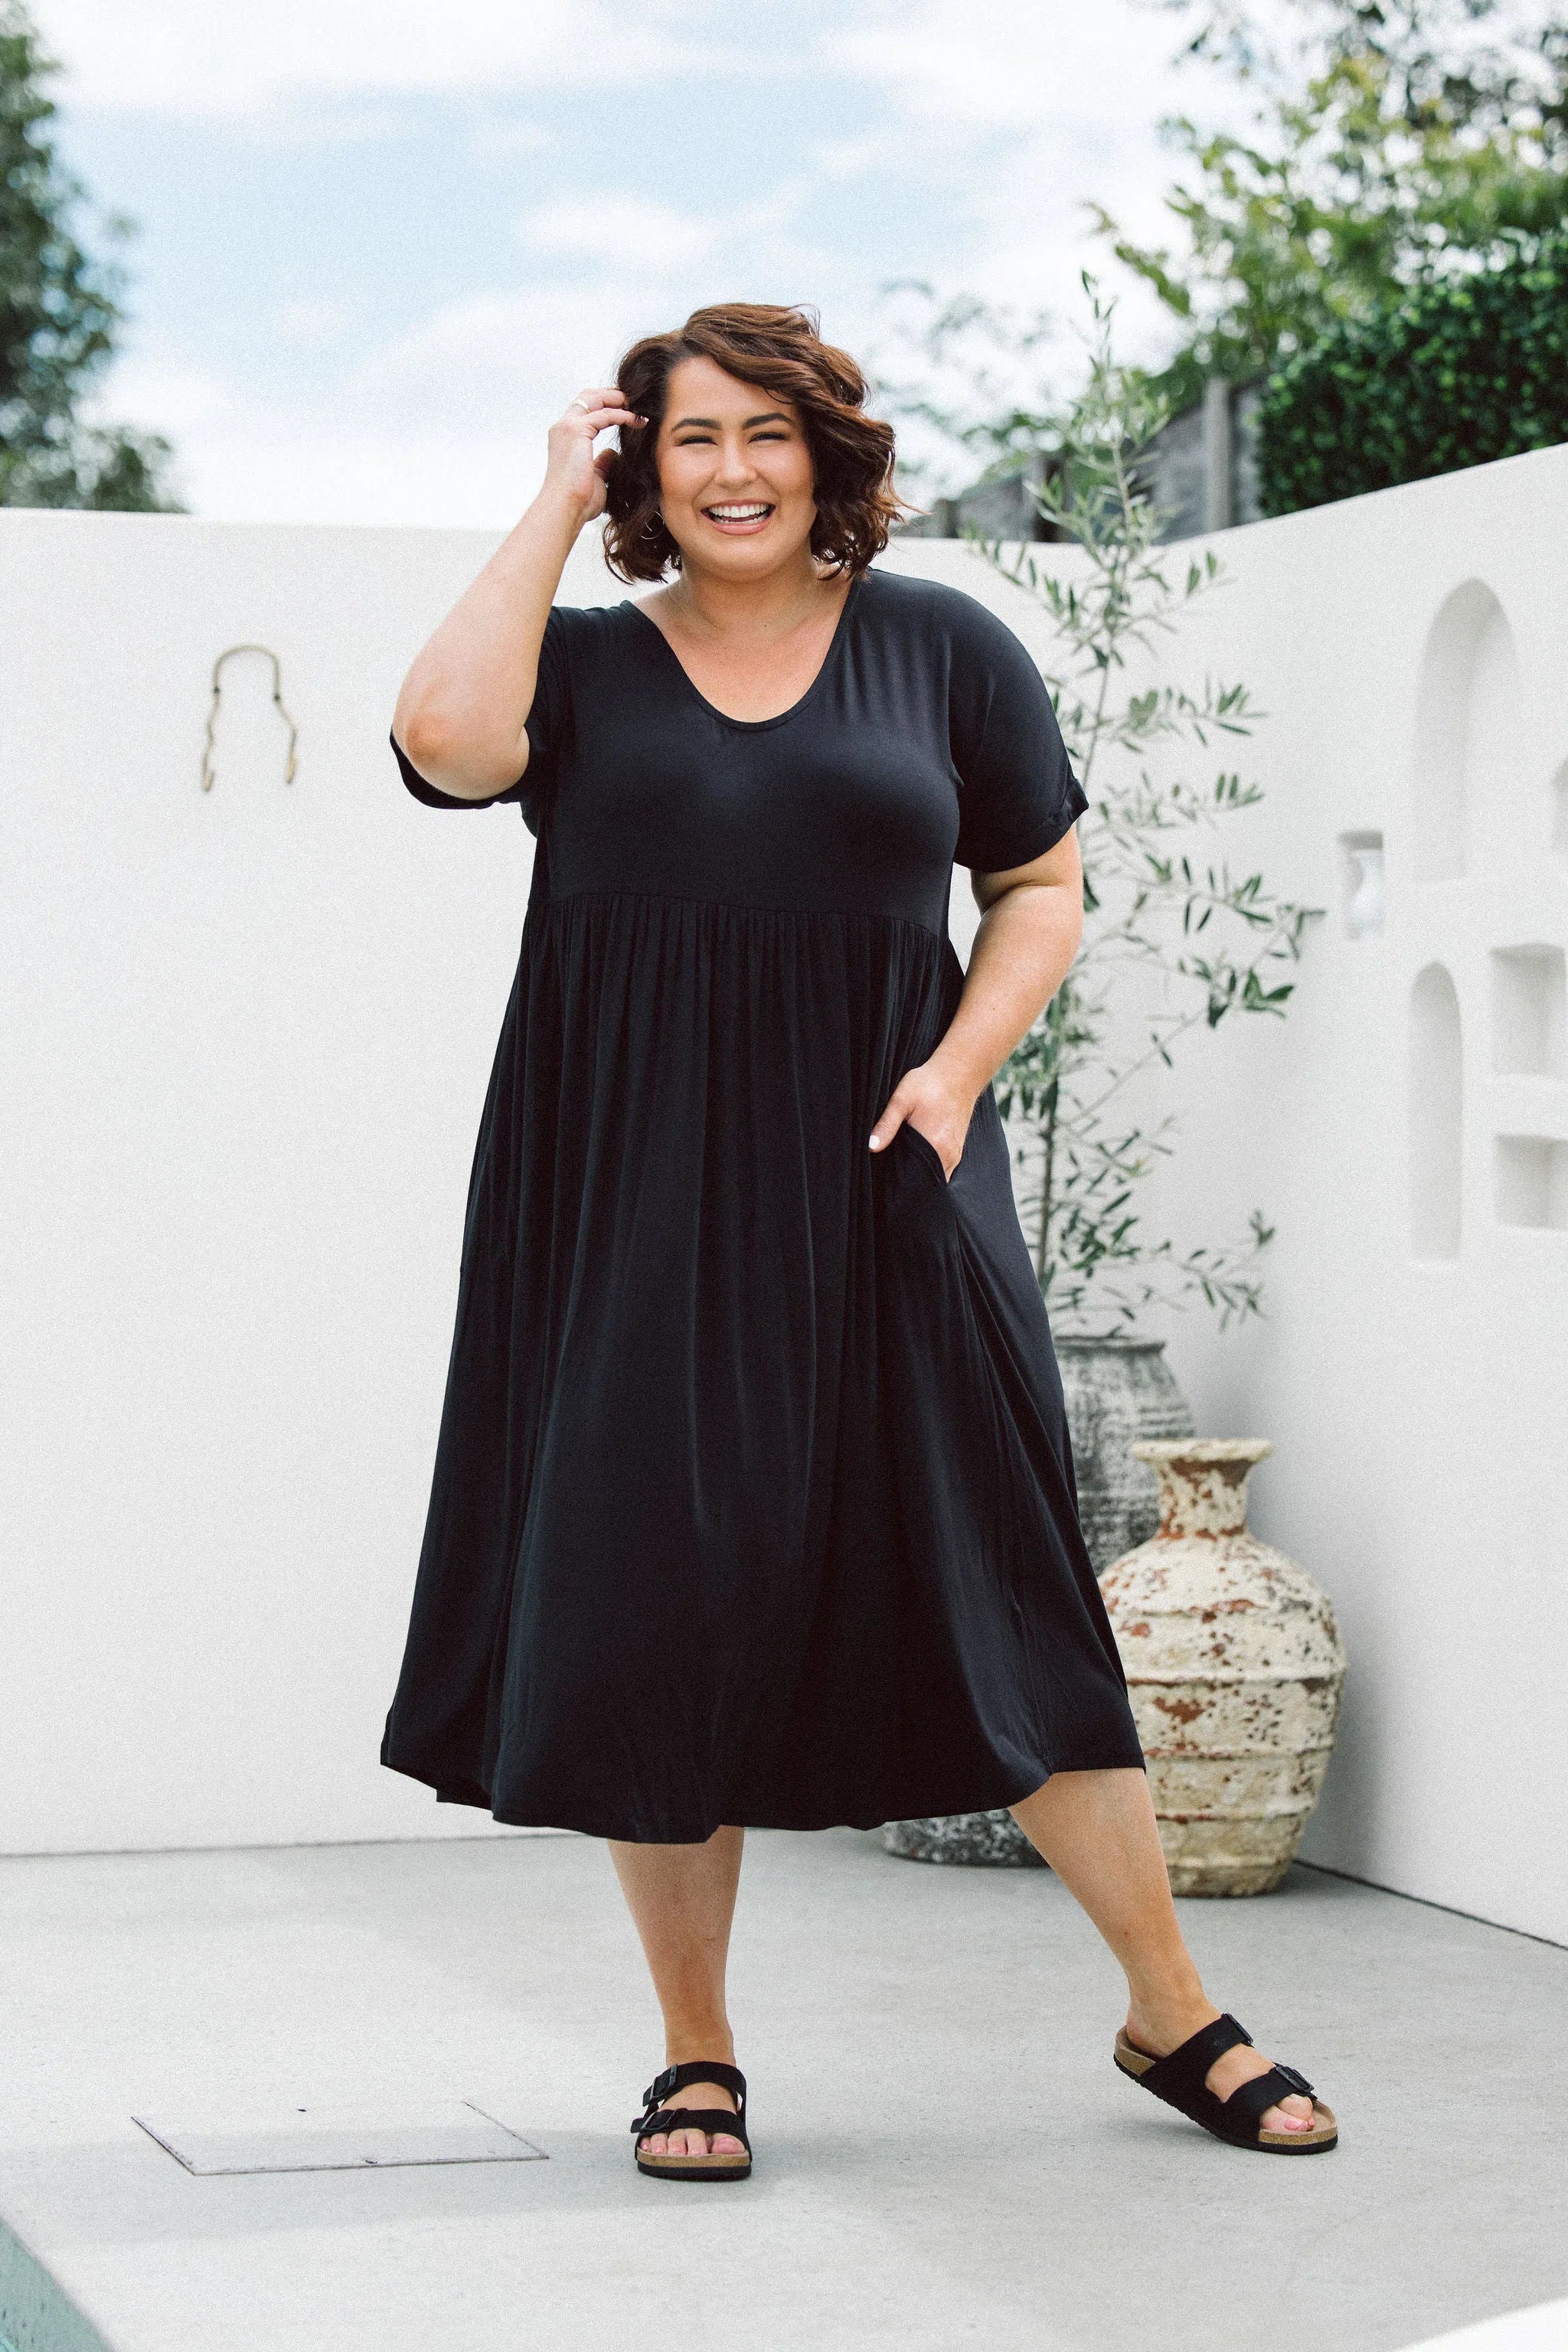 Buy Women's Plus Size Dress Online in Black. Afterpay Available at ...